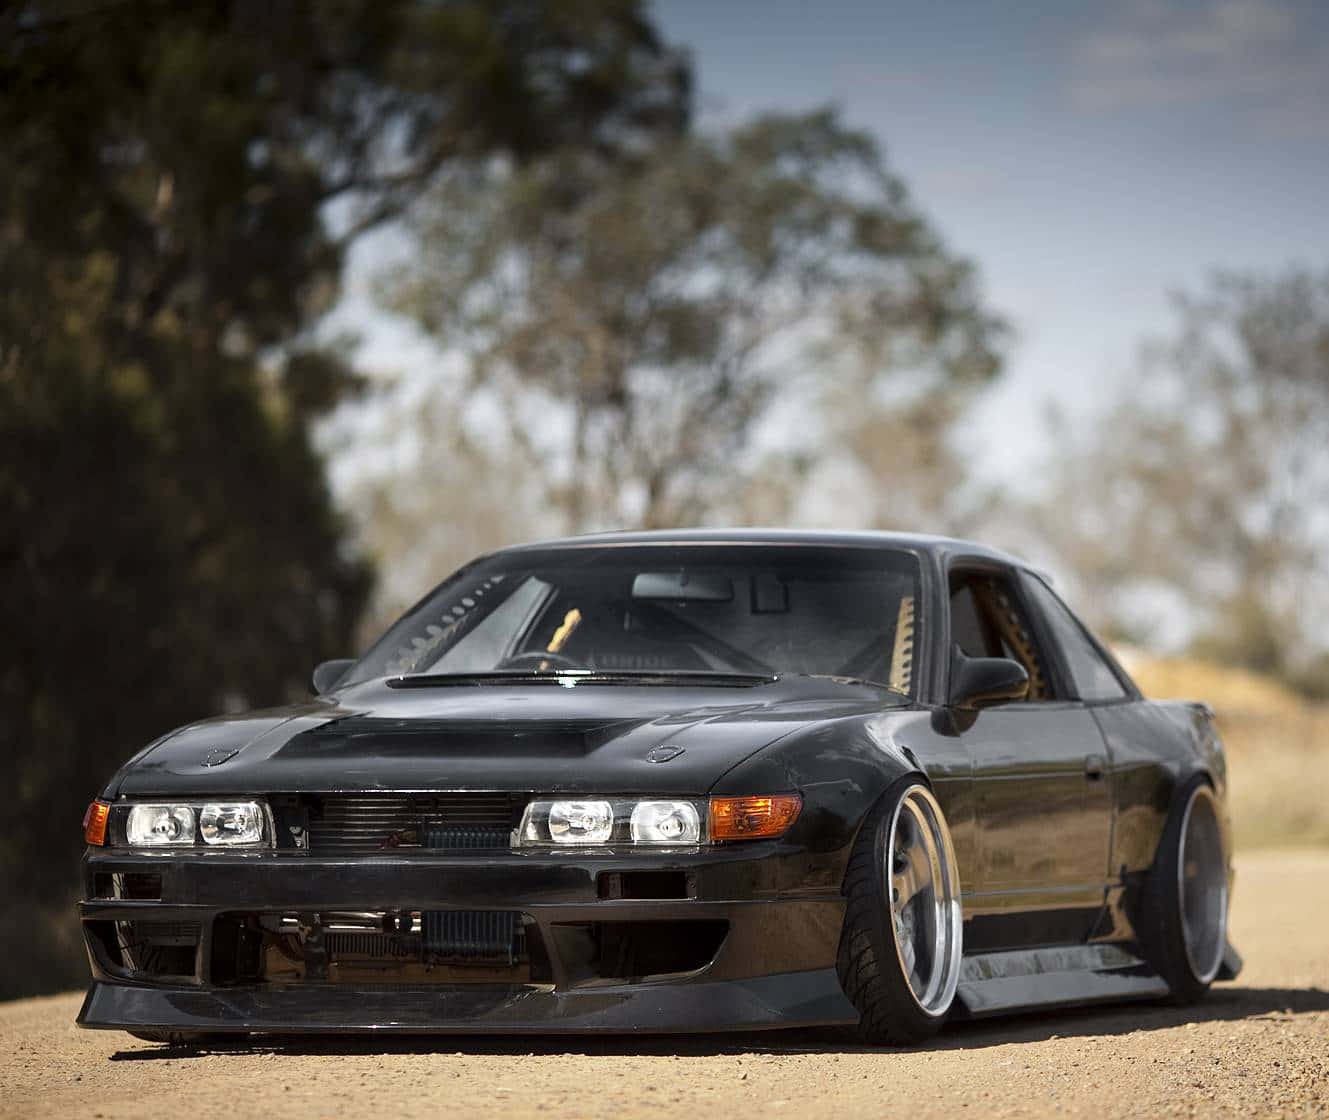 Nissan Silvia S13 - An Iconic Japanese Sports Car Wallpaper